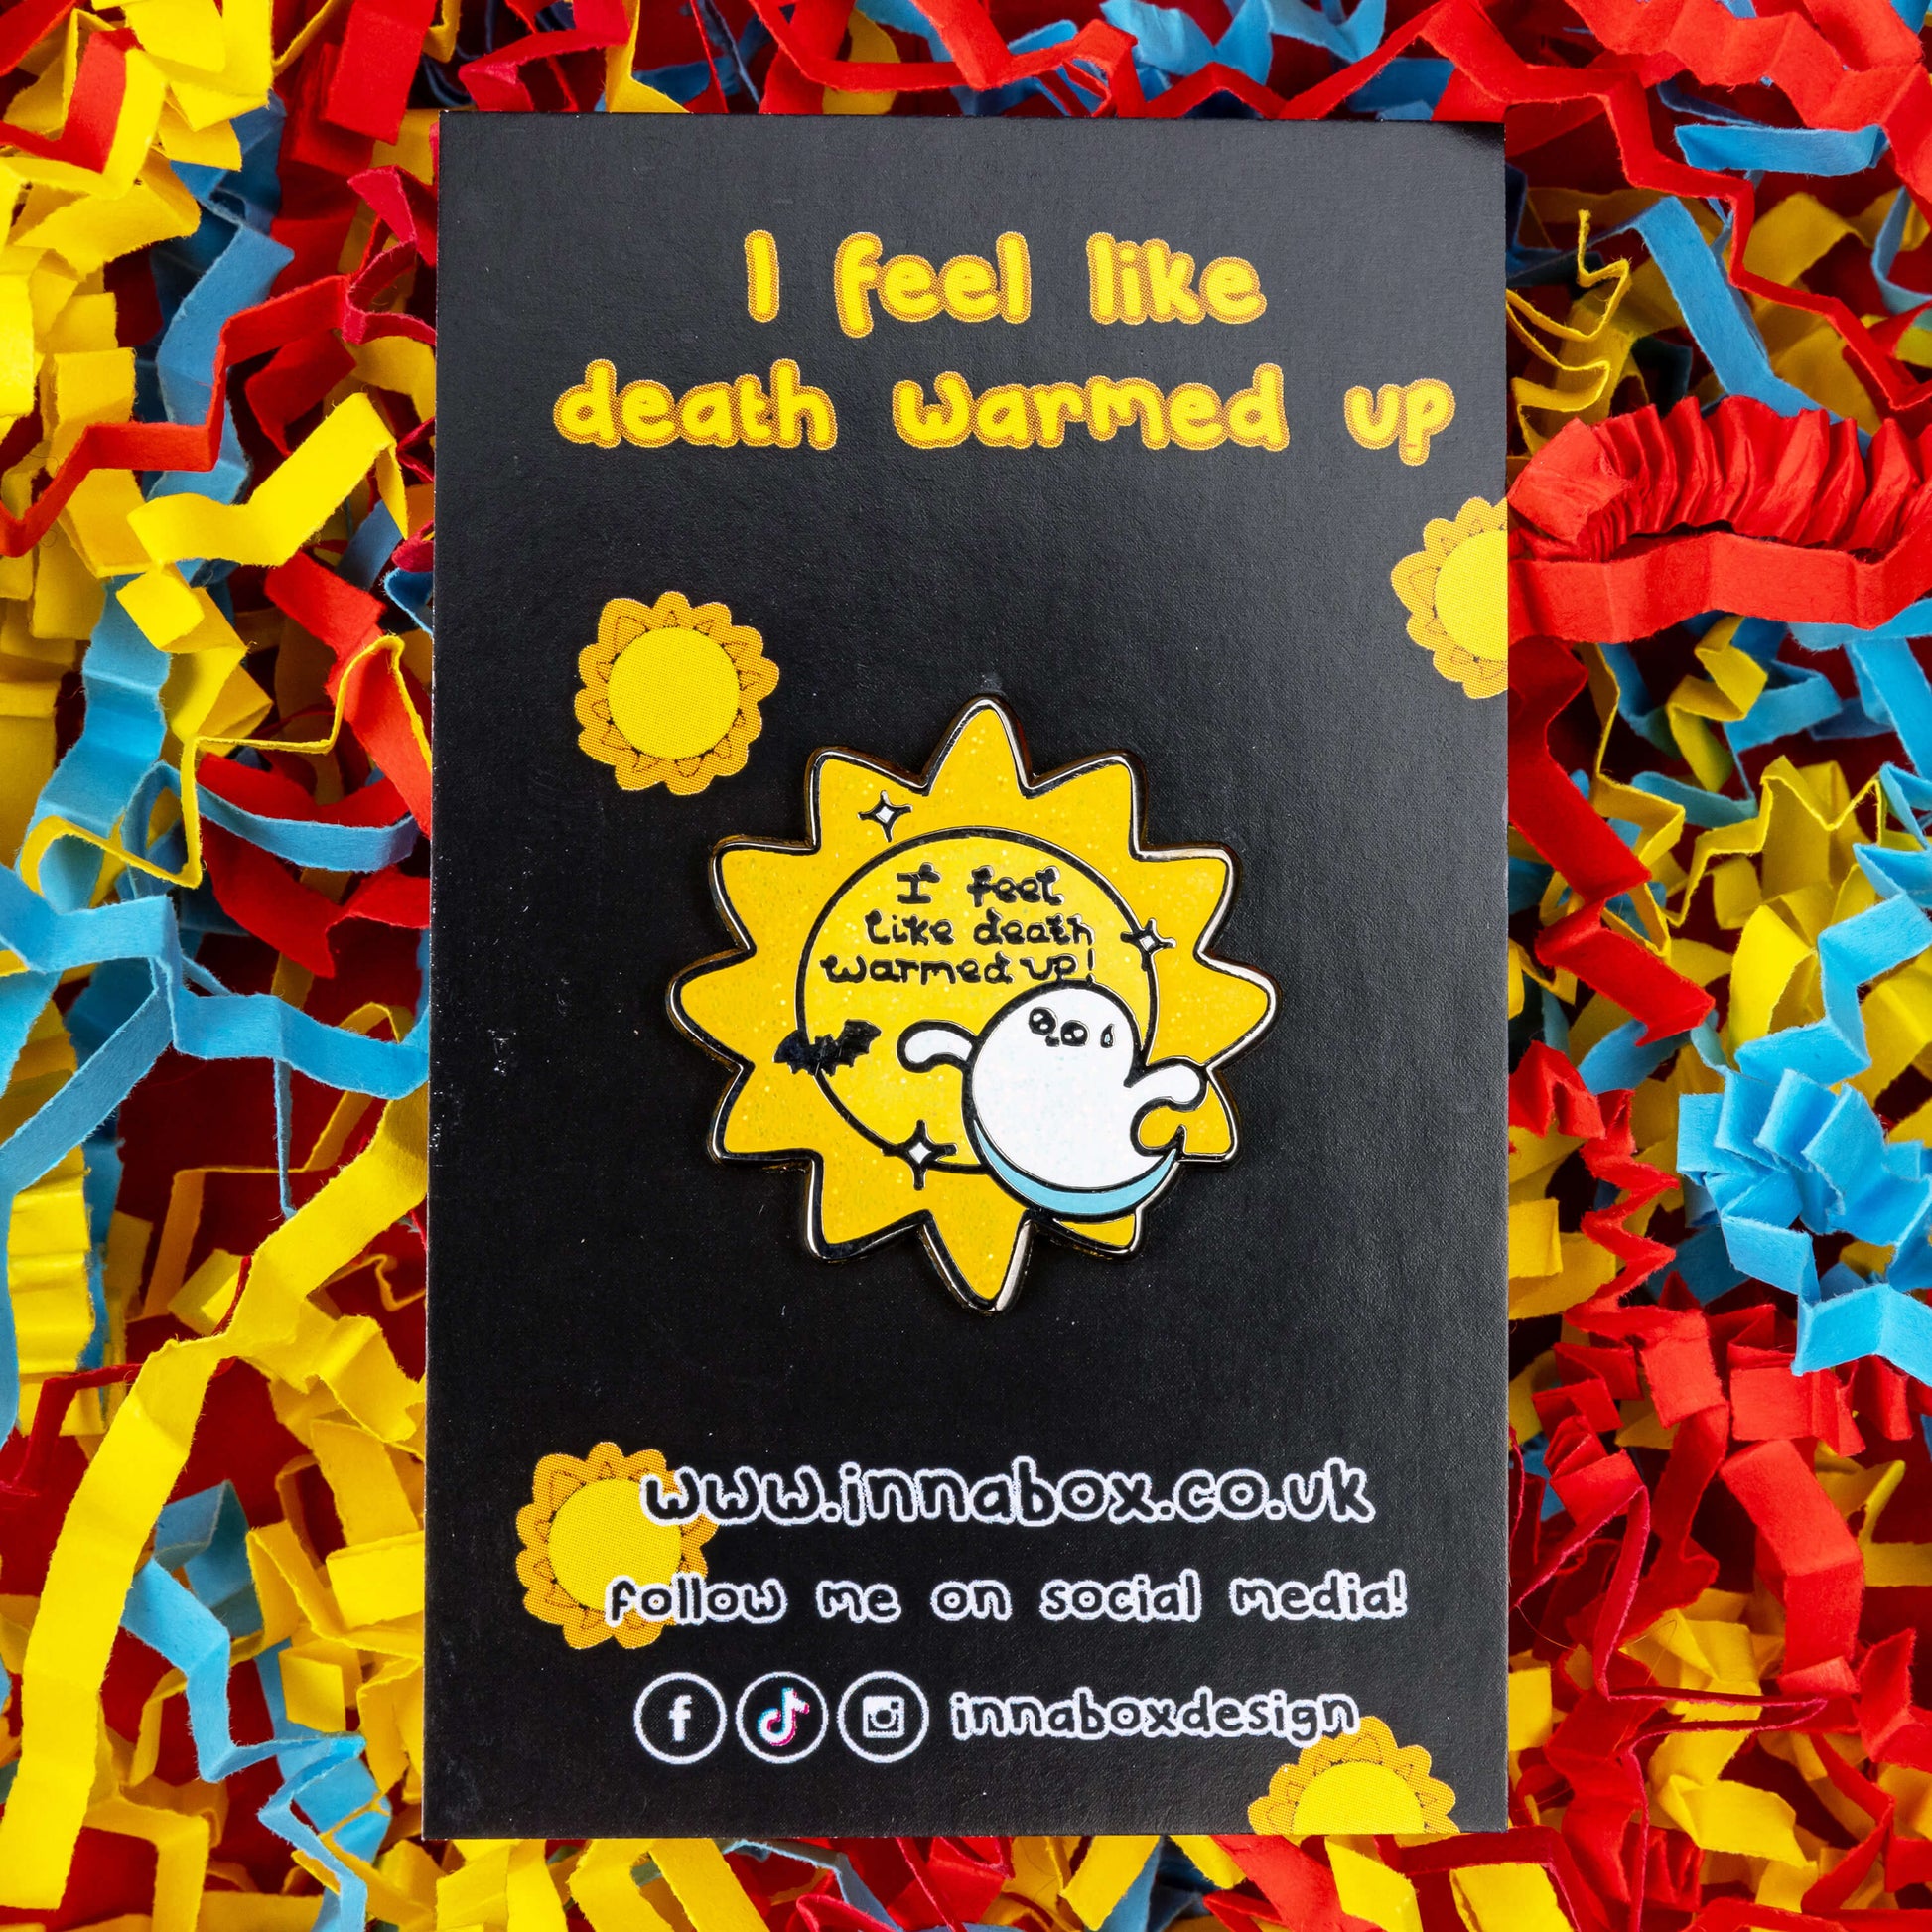 Death Warmed Up Halloween Pin on black backing card with yellow suns on on a red, blue and yellow coloured card confetti background. The enamel pin is a glittery yellow sun pin with 'I feel like death warmed up!' in the middle with white sparkles. There is a little black bat and a cute white ghost with a smile and a sweat droplet on its forehead. Hand drawn to raise awareness for chronic illness